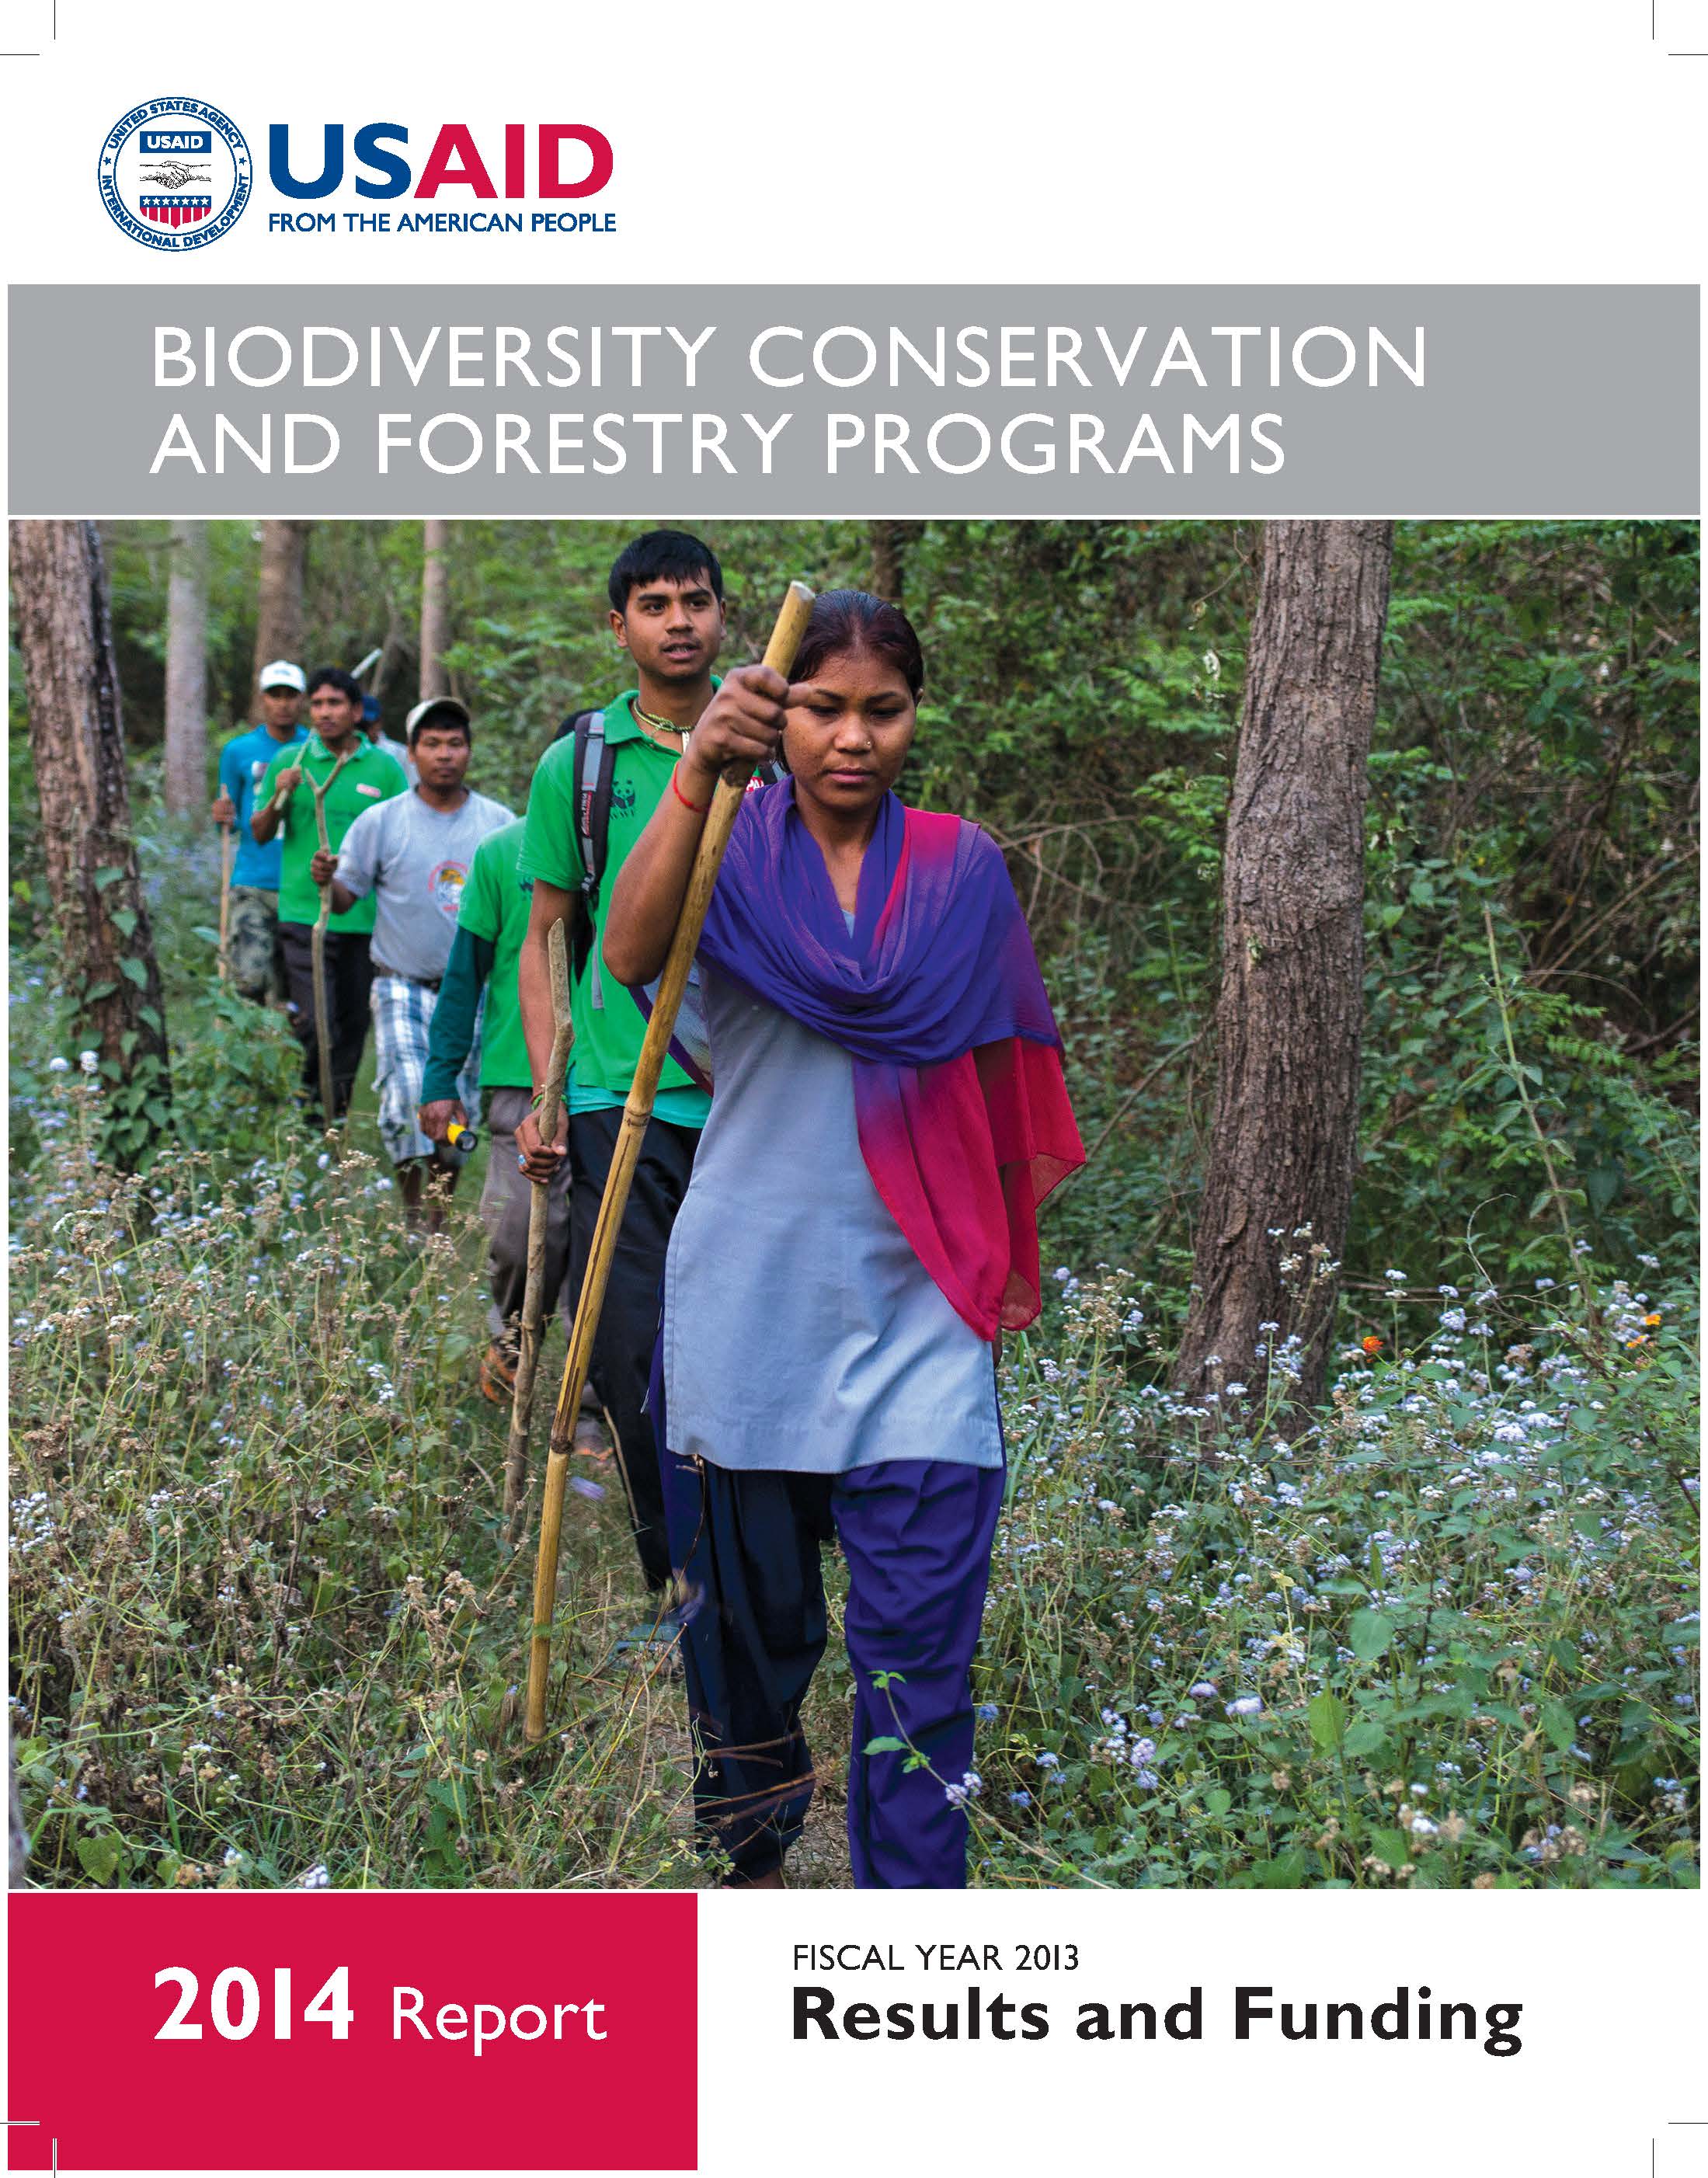 USAID Biodiversity Conservation and Forestry Programs, 2014 Report